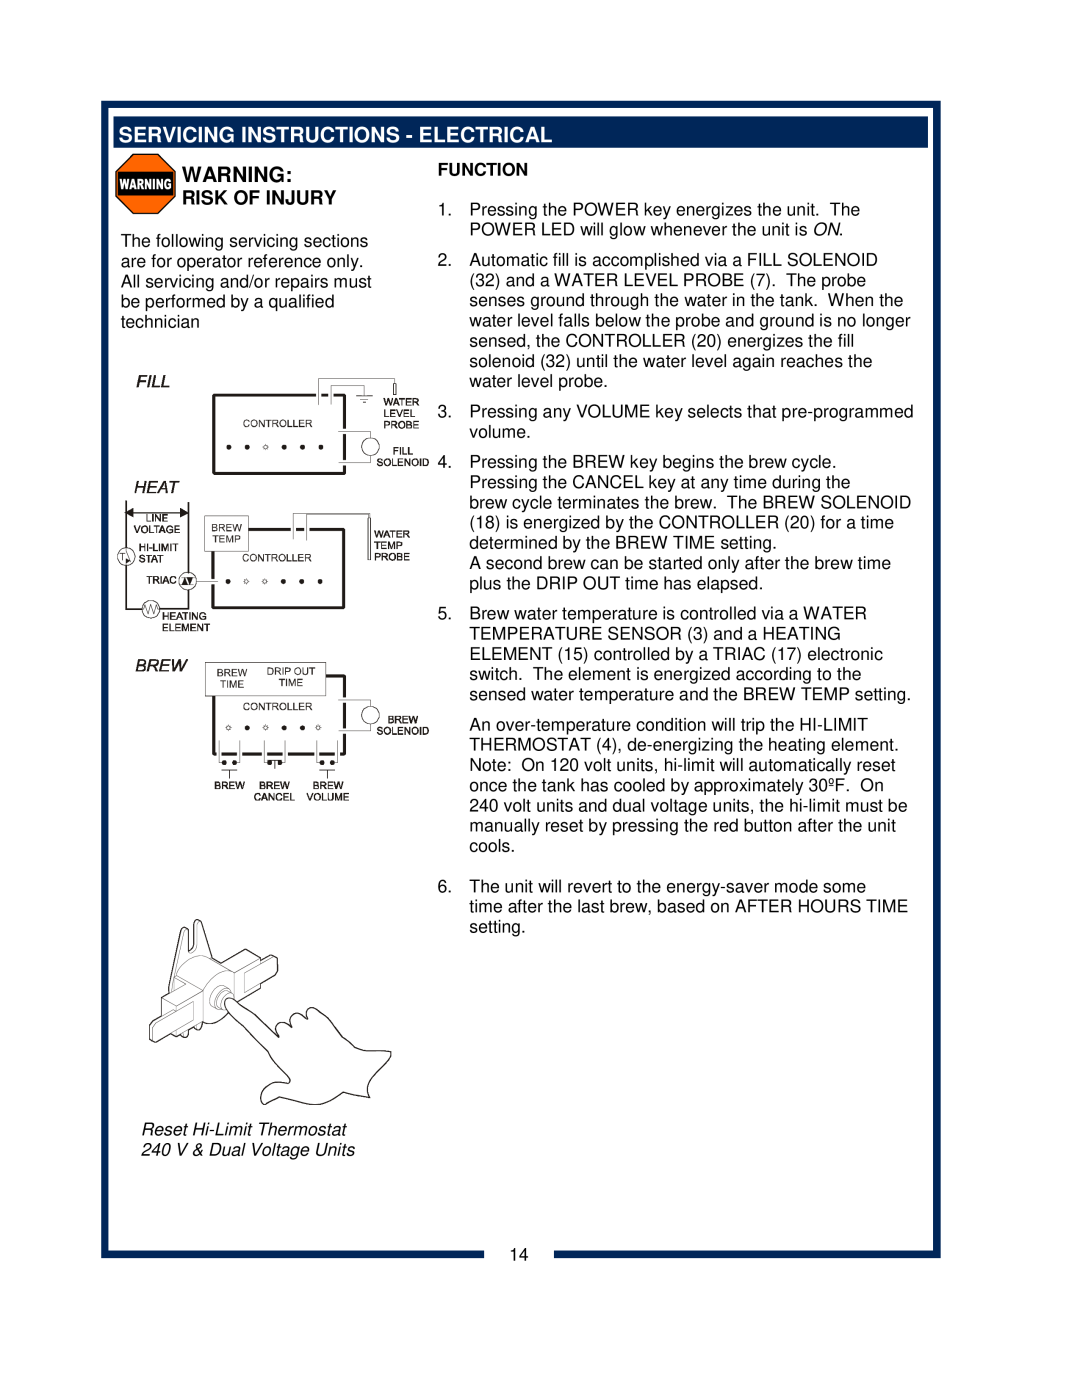 Bloomfield 2080 Servicing Instructions - Electrical, Reset Hi-Limit Thermostat 240 V & Dual Voltage Units, Risk Of Injury 